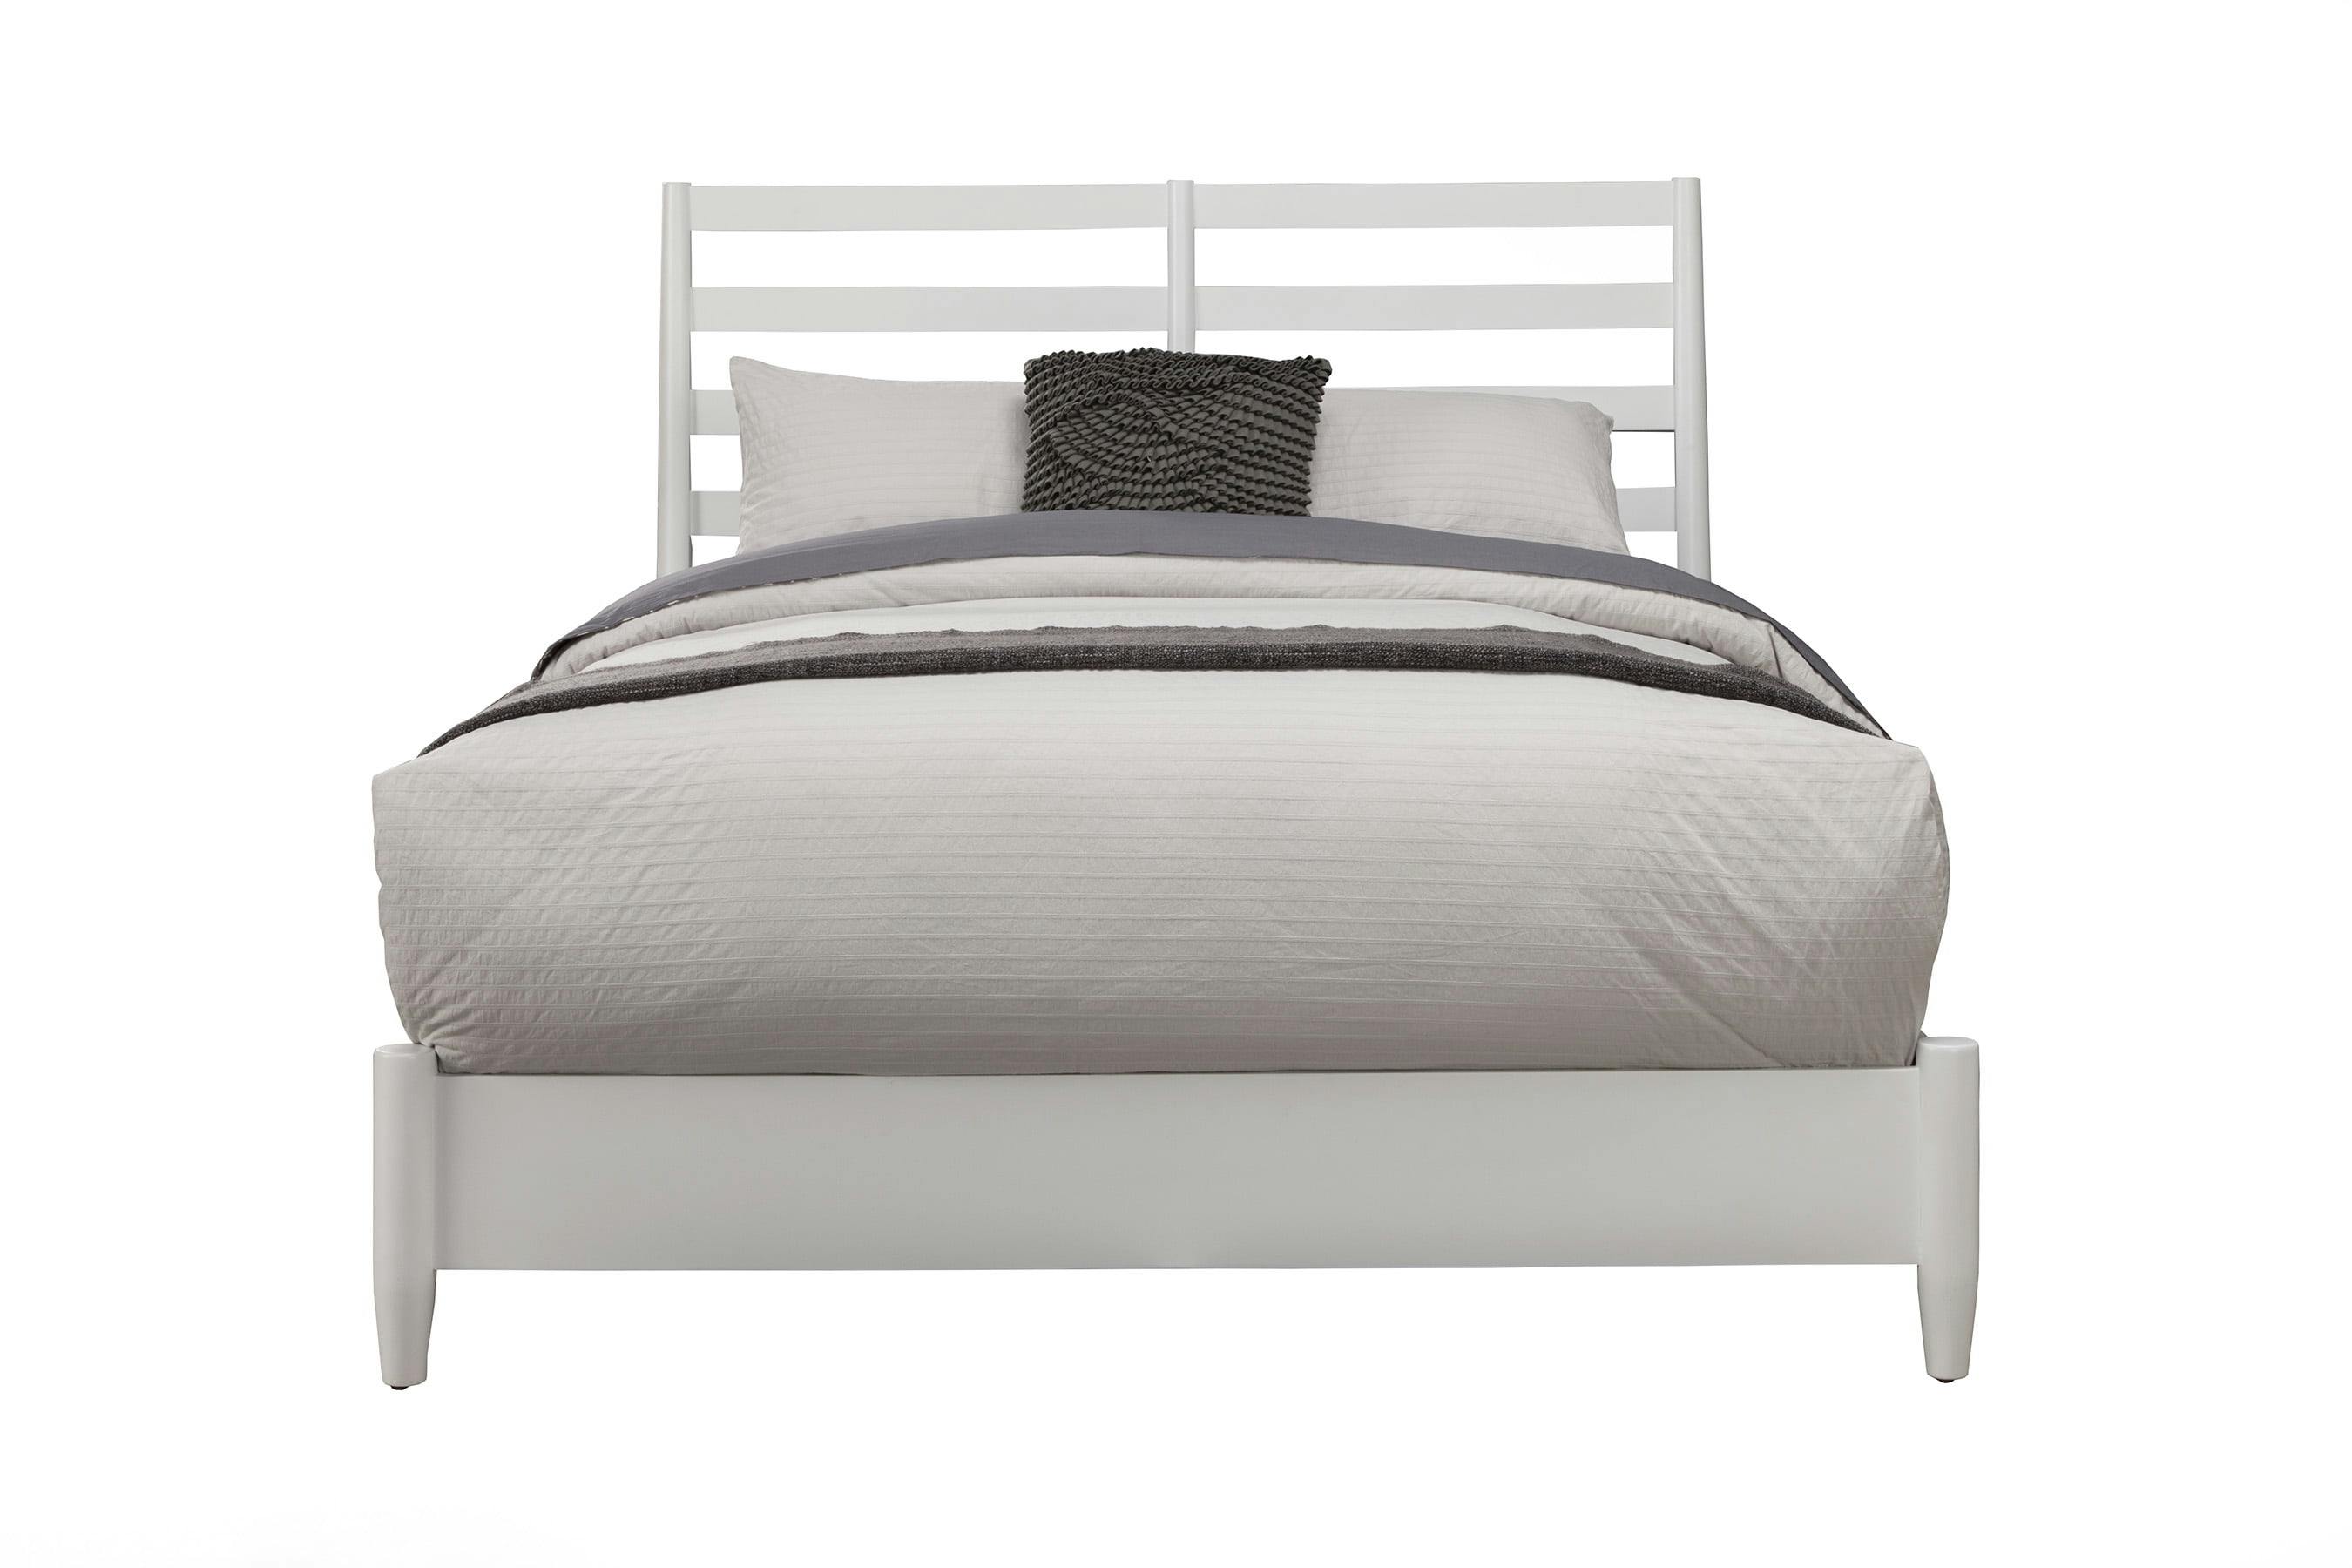 Elegant Queen-Sized White Wood Frame Panel Bed with Upholstered Slat Headboard